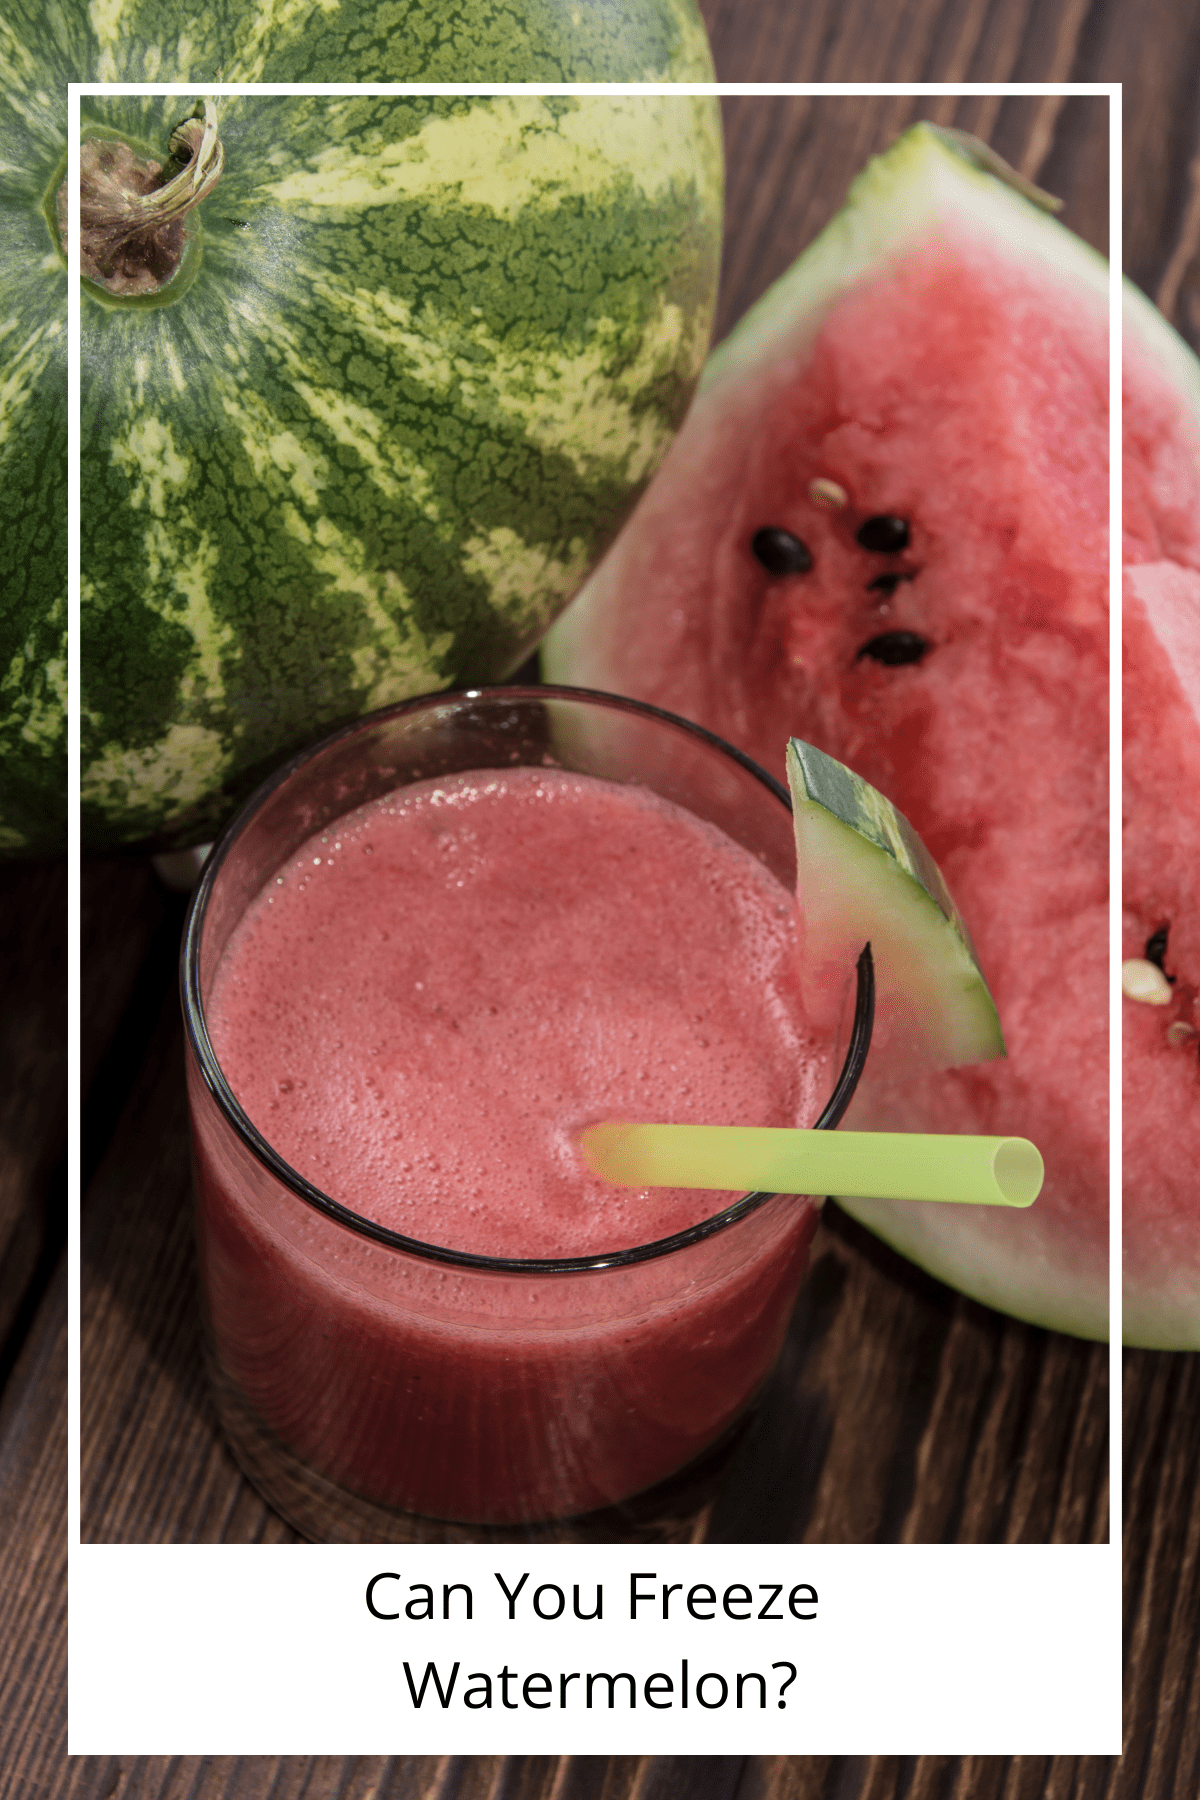 A large wedge of watermelon on a table with a watermelon smoothie in a glass.